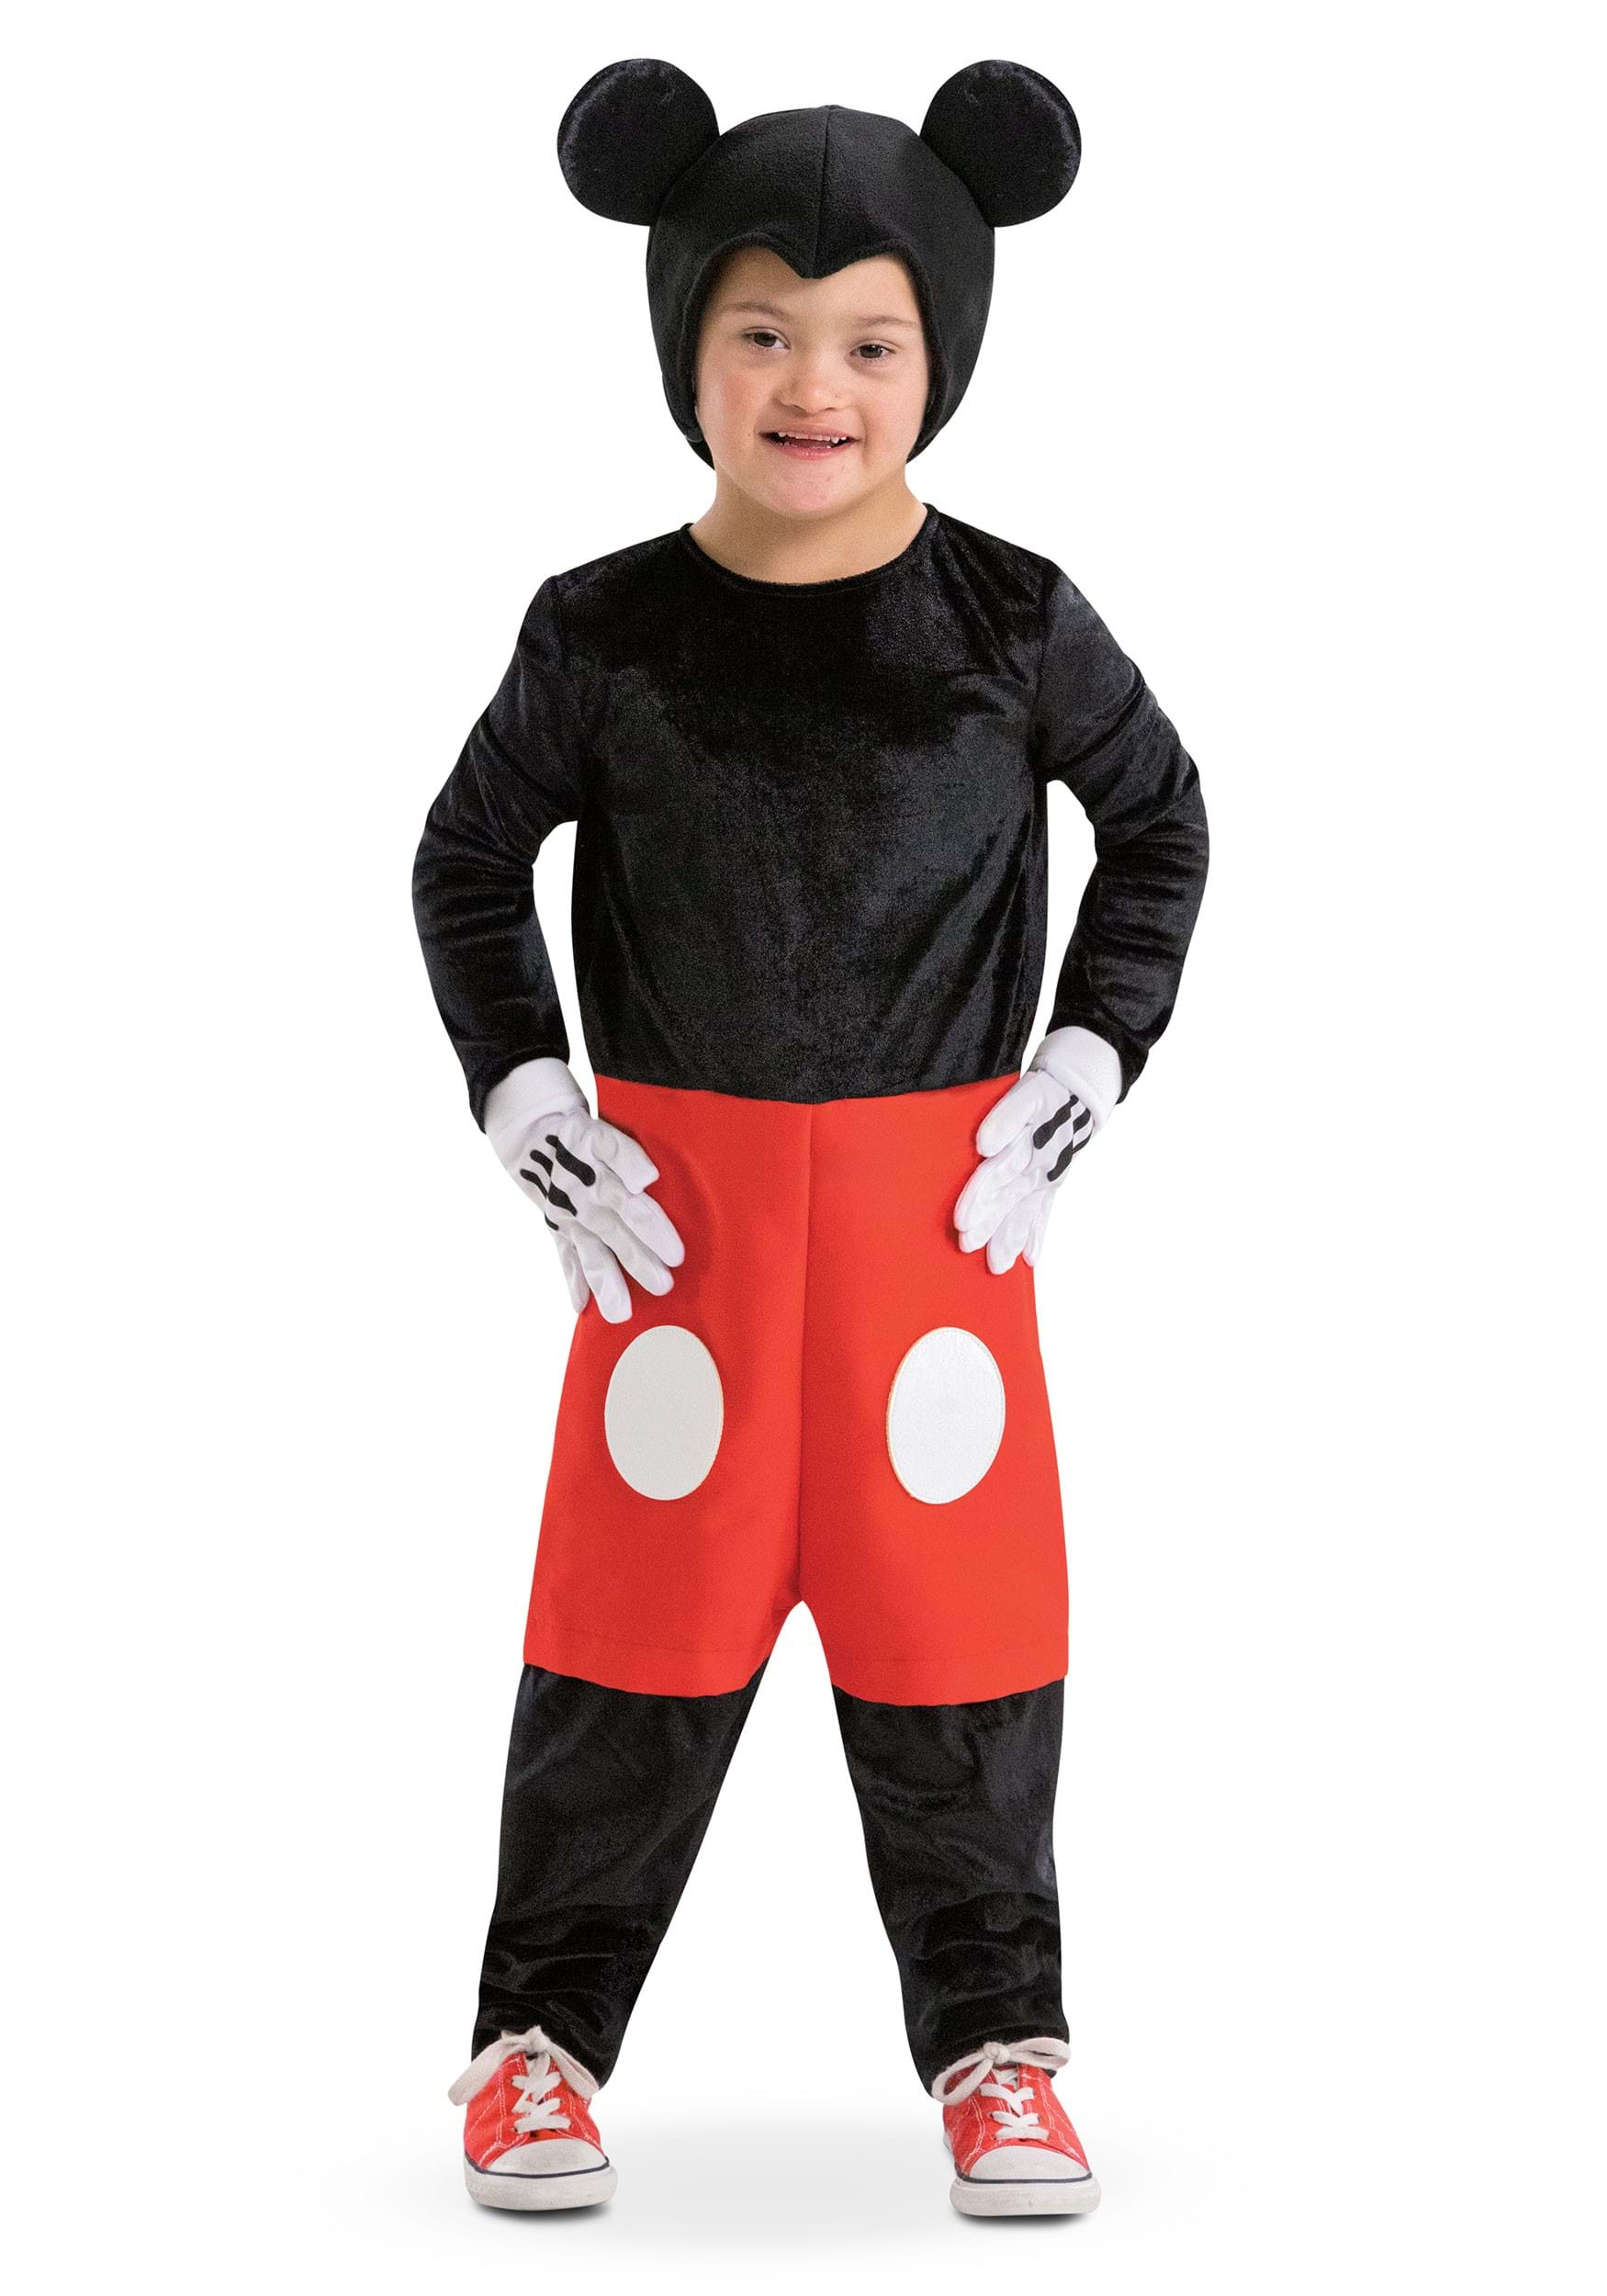 Photos - Fancy Dress Disguise Mickey Mouse Kid's Adaptive Costume Black/Red/White